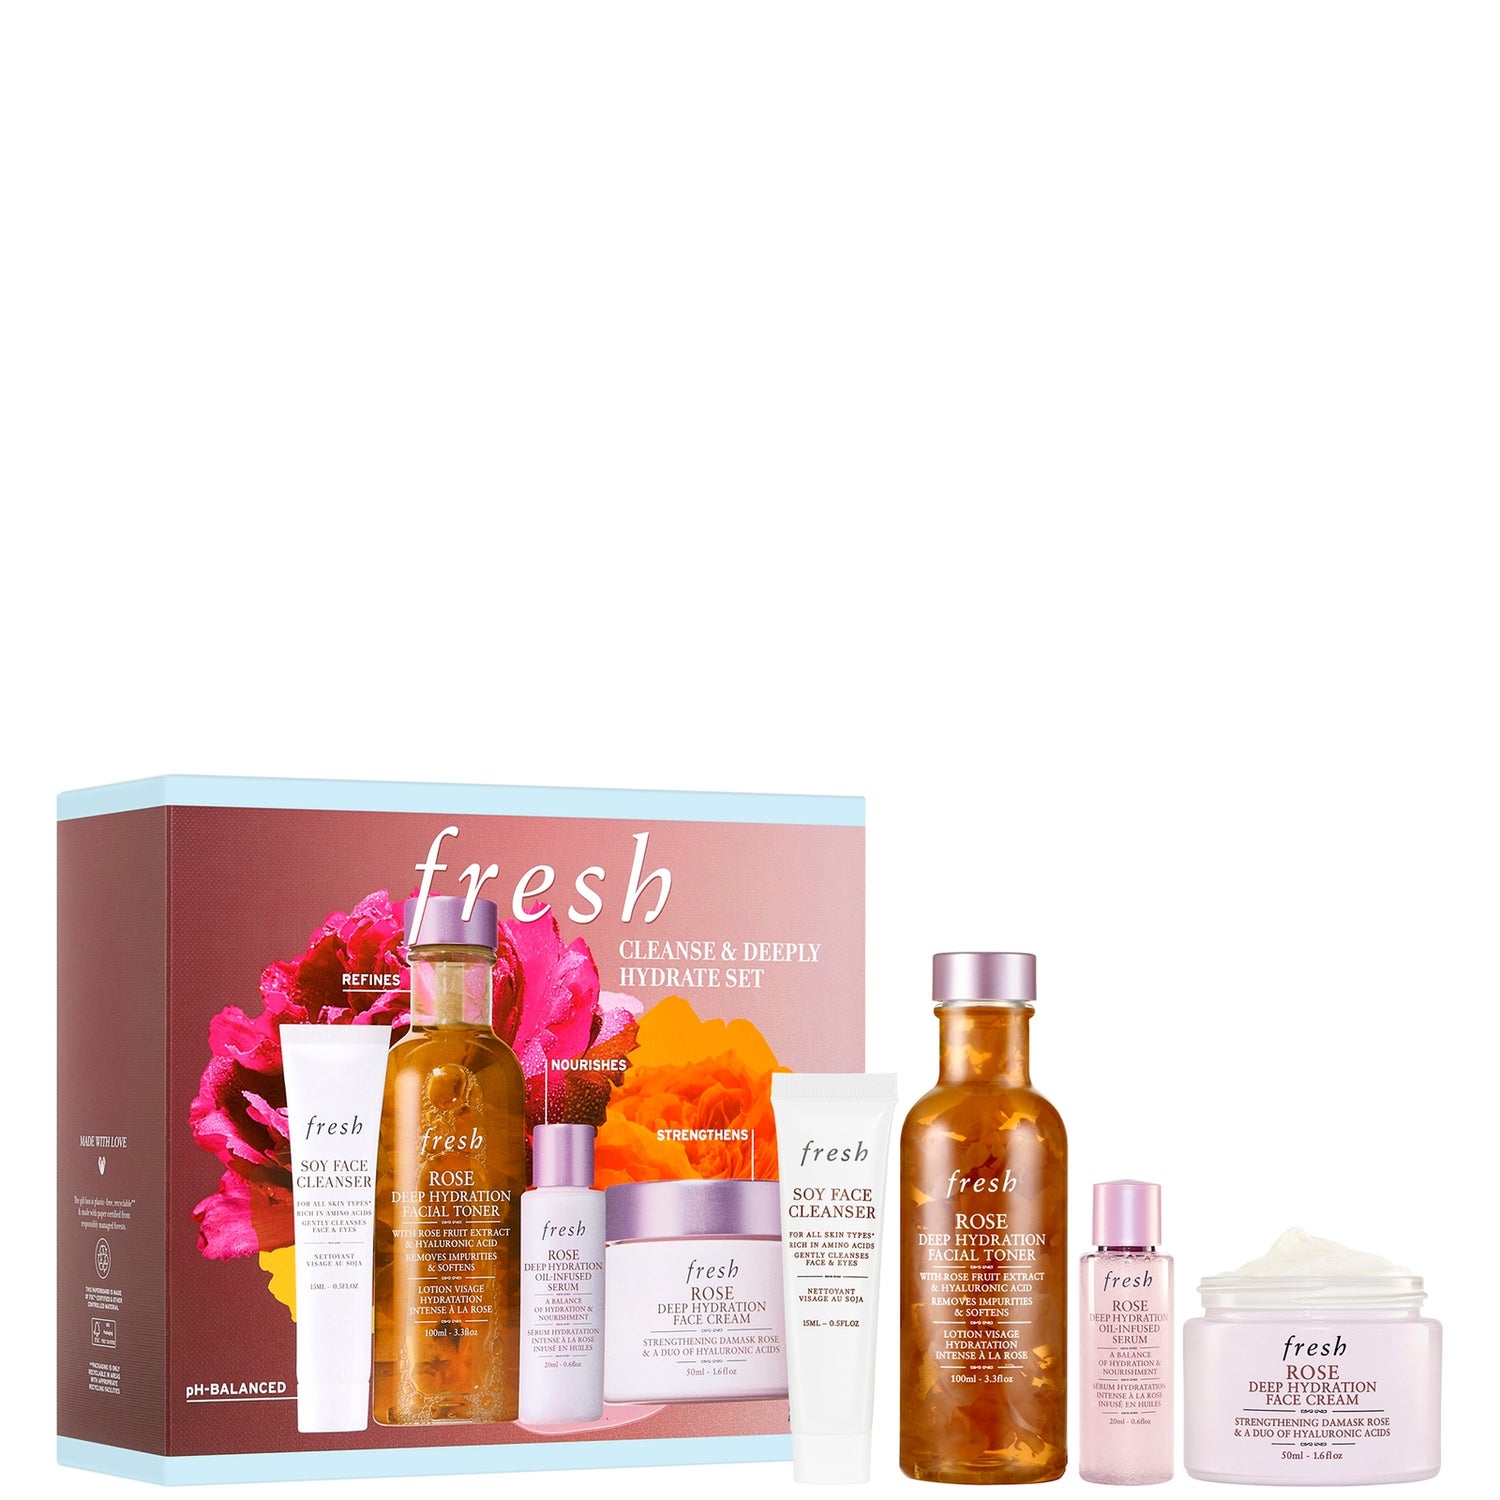 Fresh Cleanse & Deeply Hydrate Gift Set (Worth £82.00)